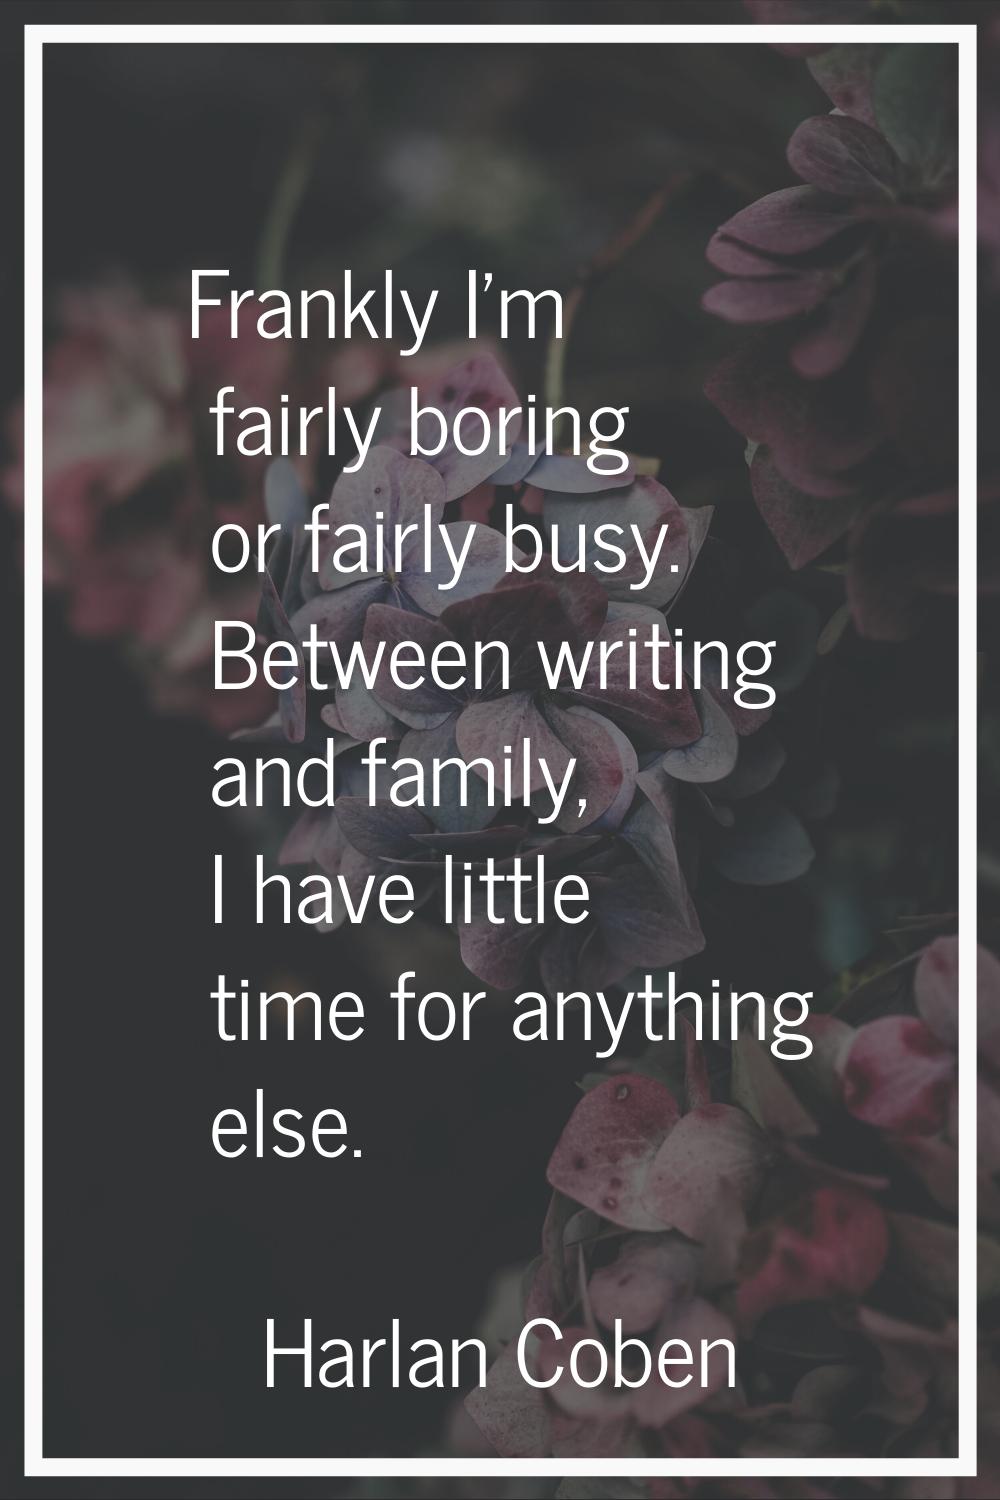 Frankly I'm fairly boring or fairly busy. Between writing and family, I have little time for anythi